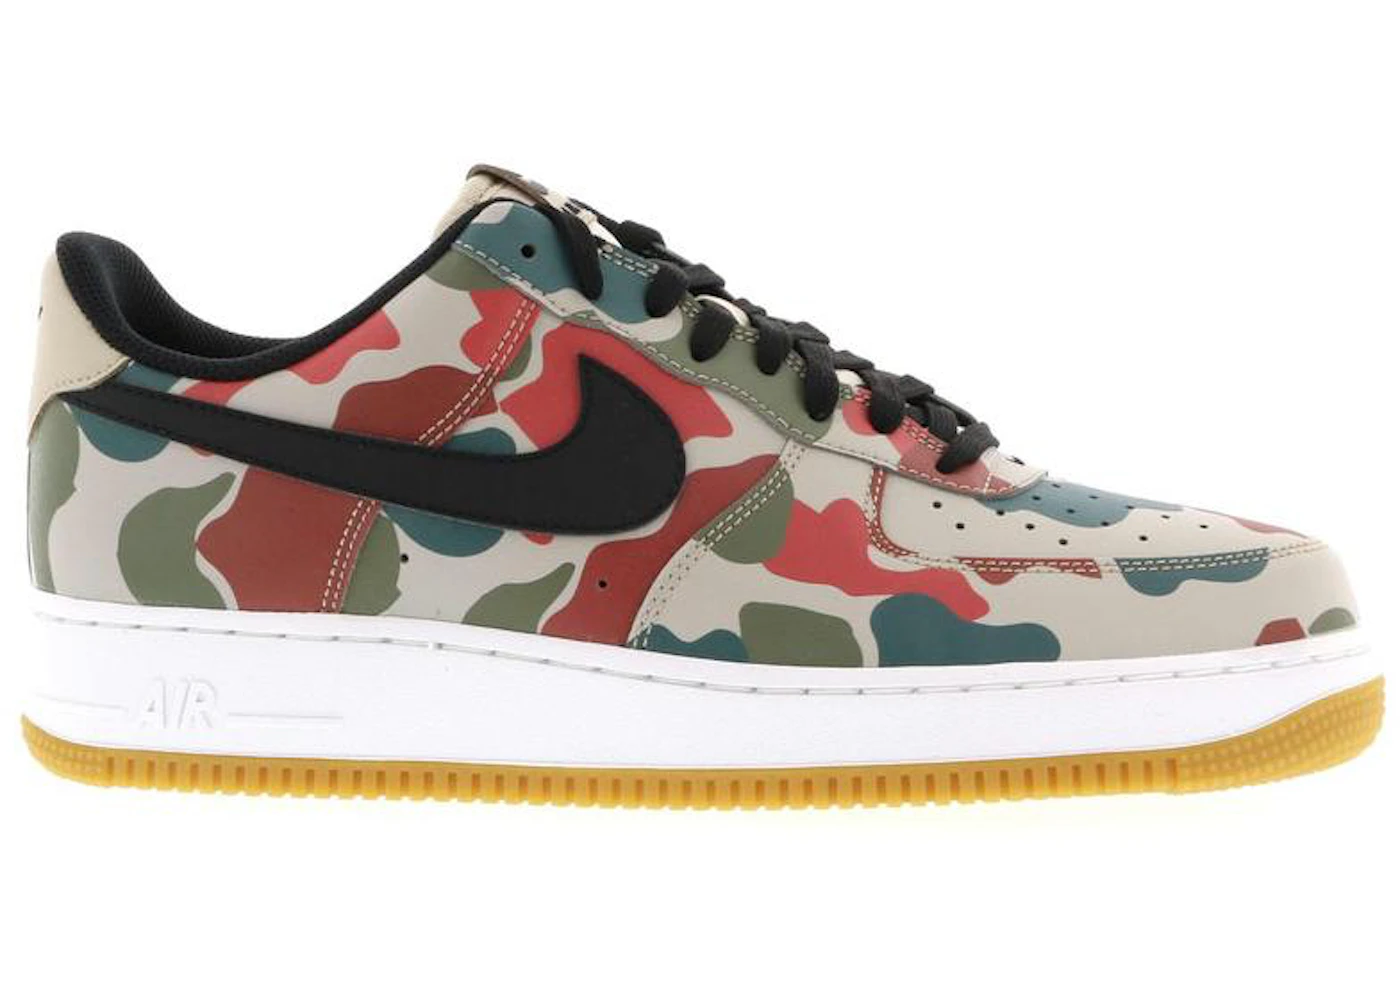 Nike Air Force 1 Low '07 LV8 Reflective Camo